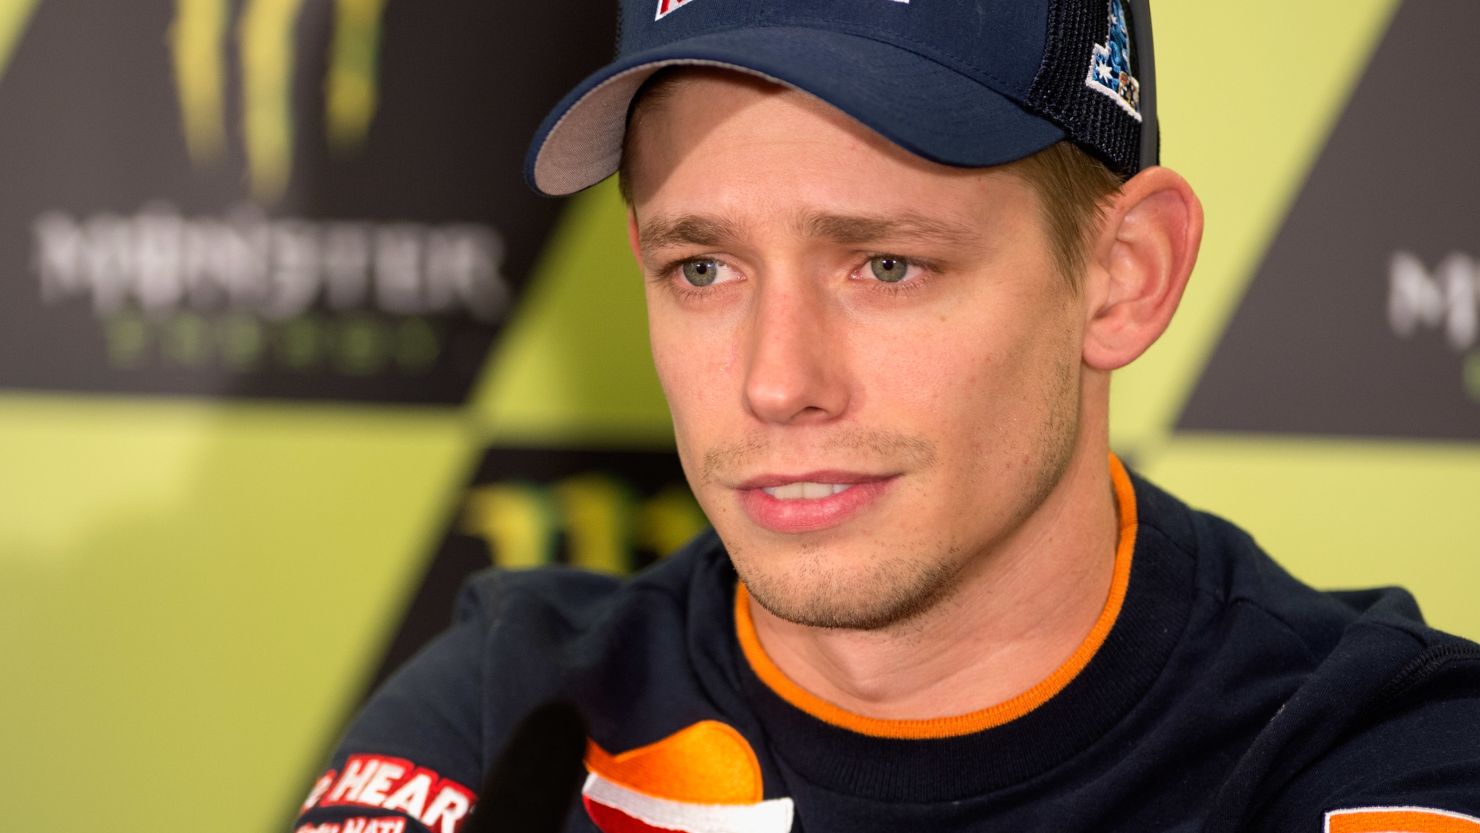 Australian MotoGP rider Casey Stoner has won the world championship twice since moving into the division in 2006.